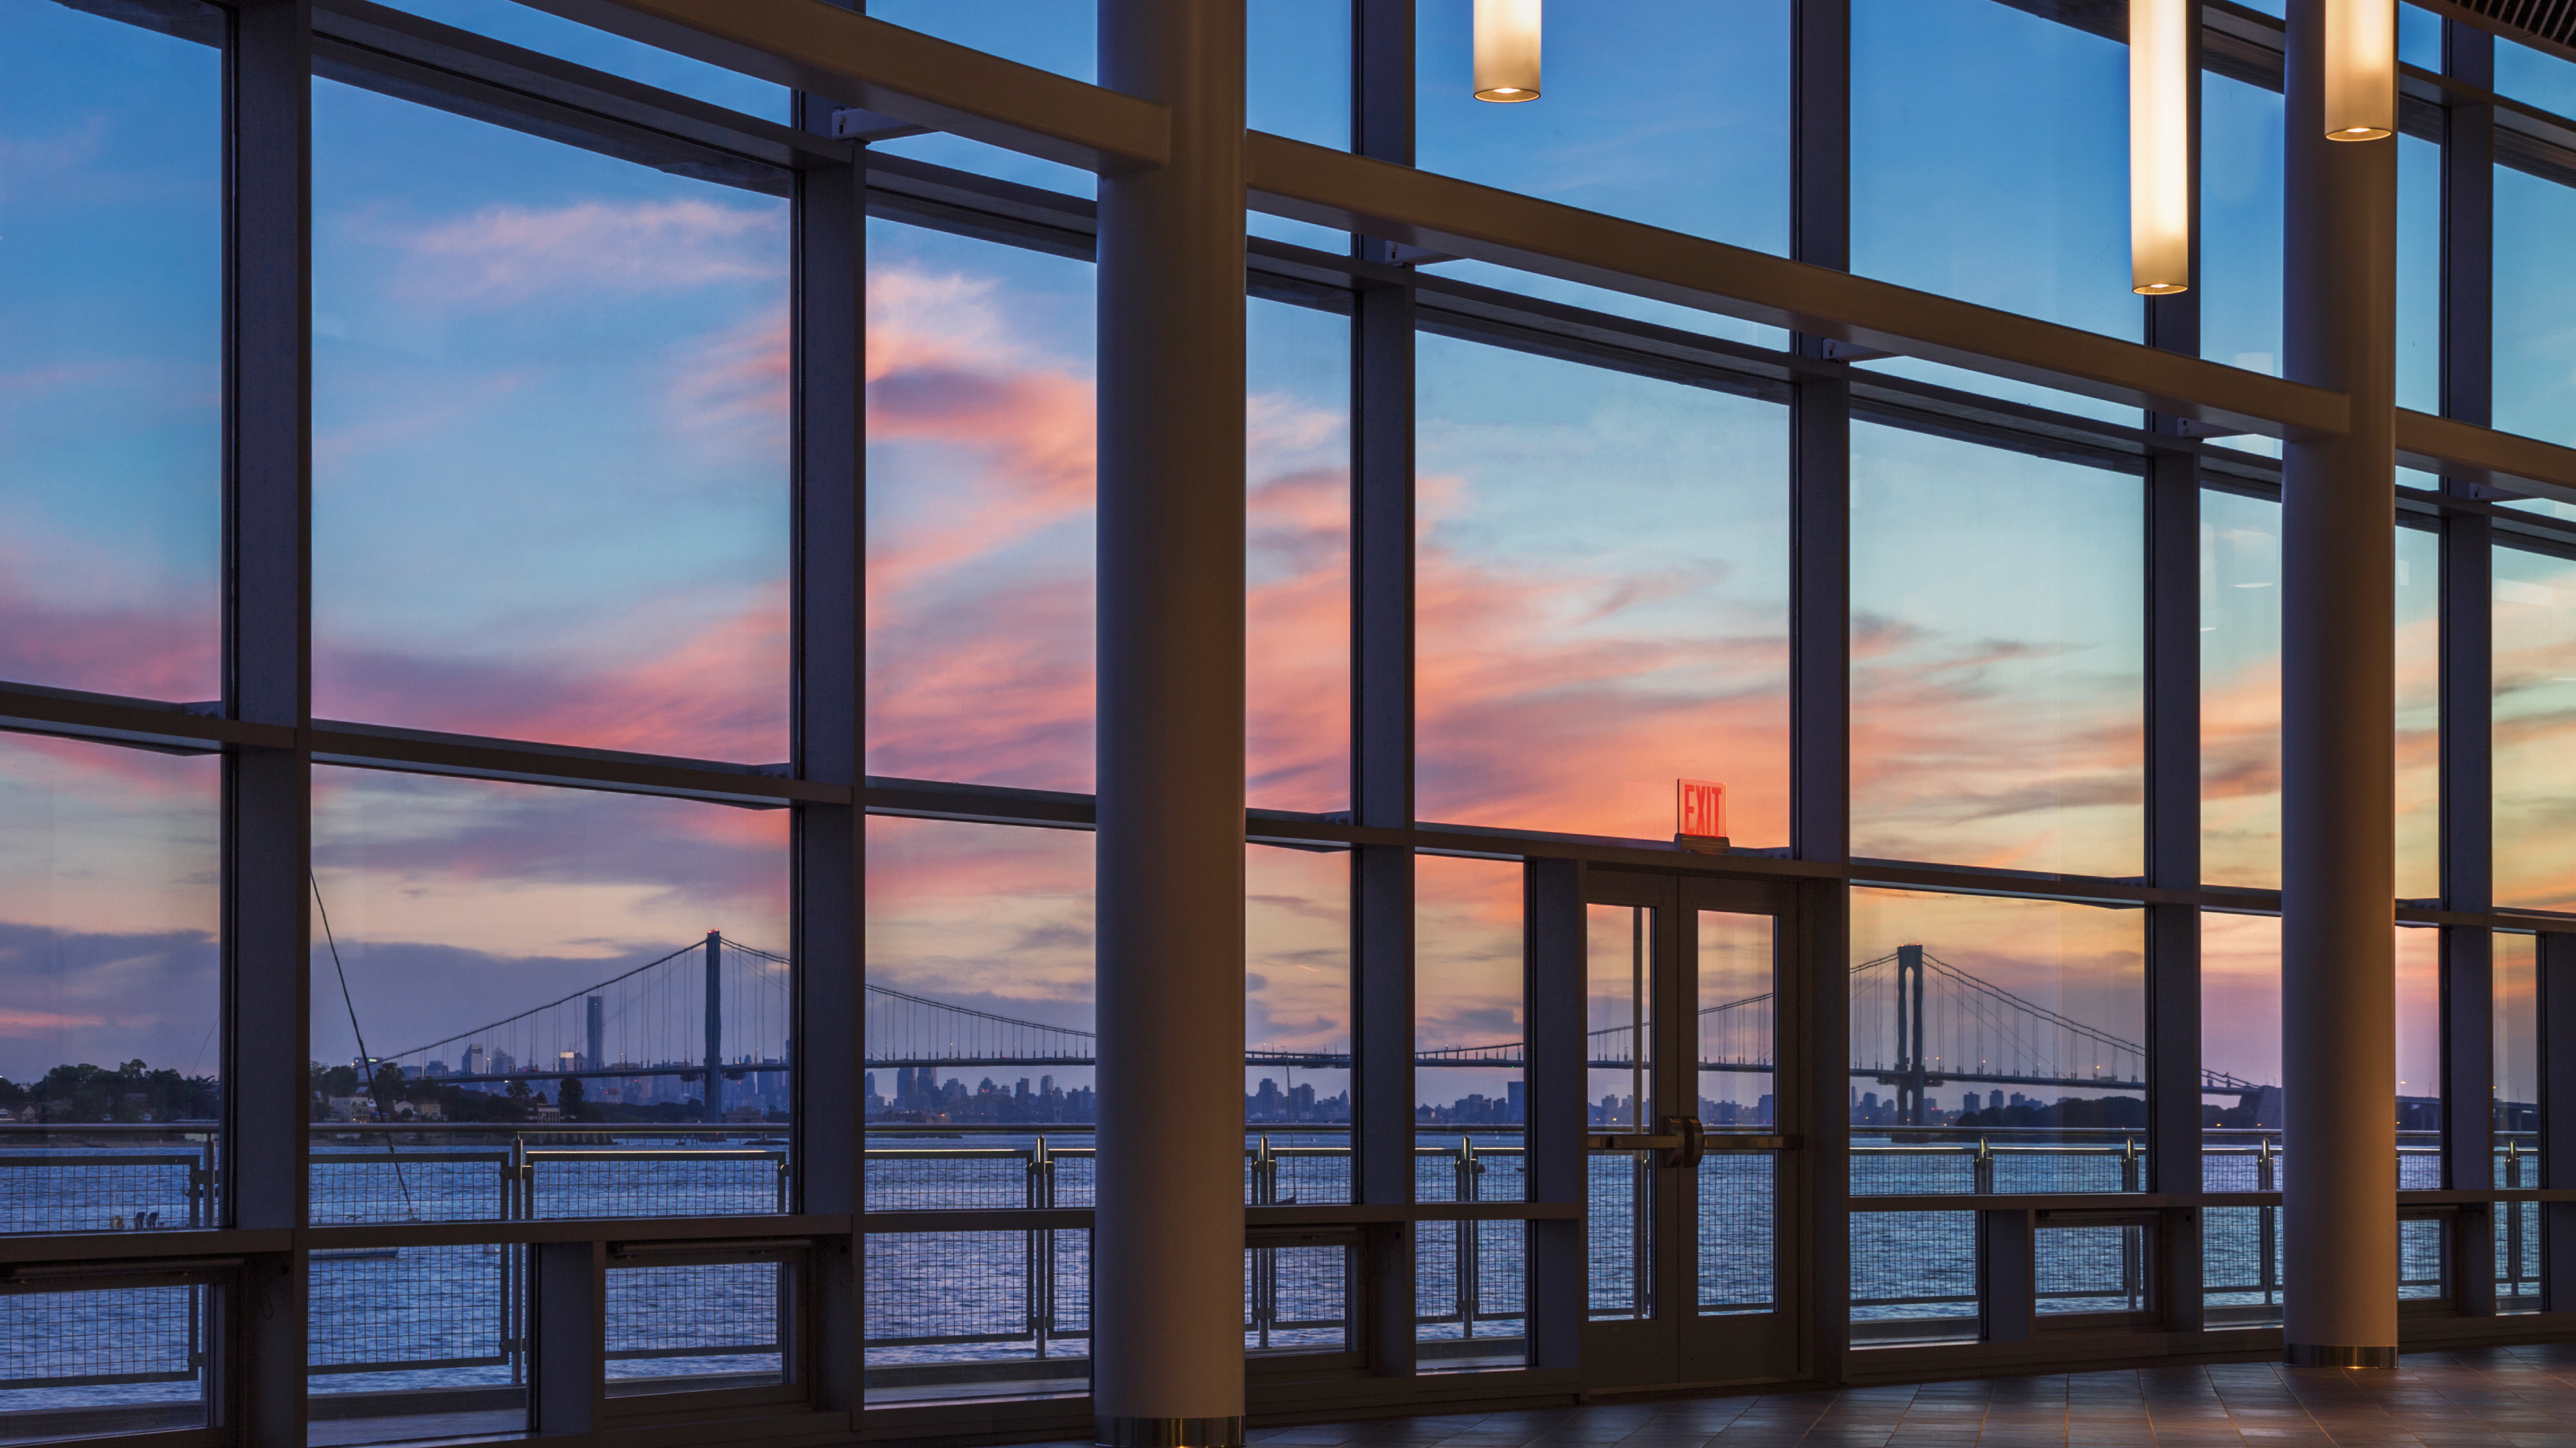 Expansive windows provide ample view of the harbor